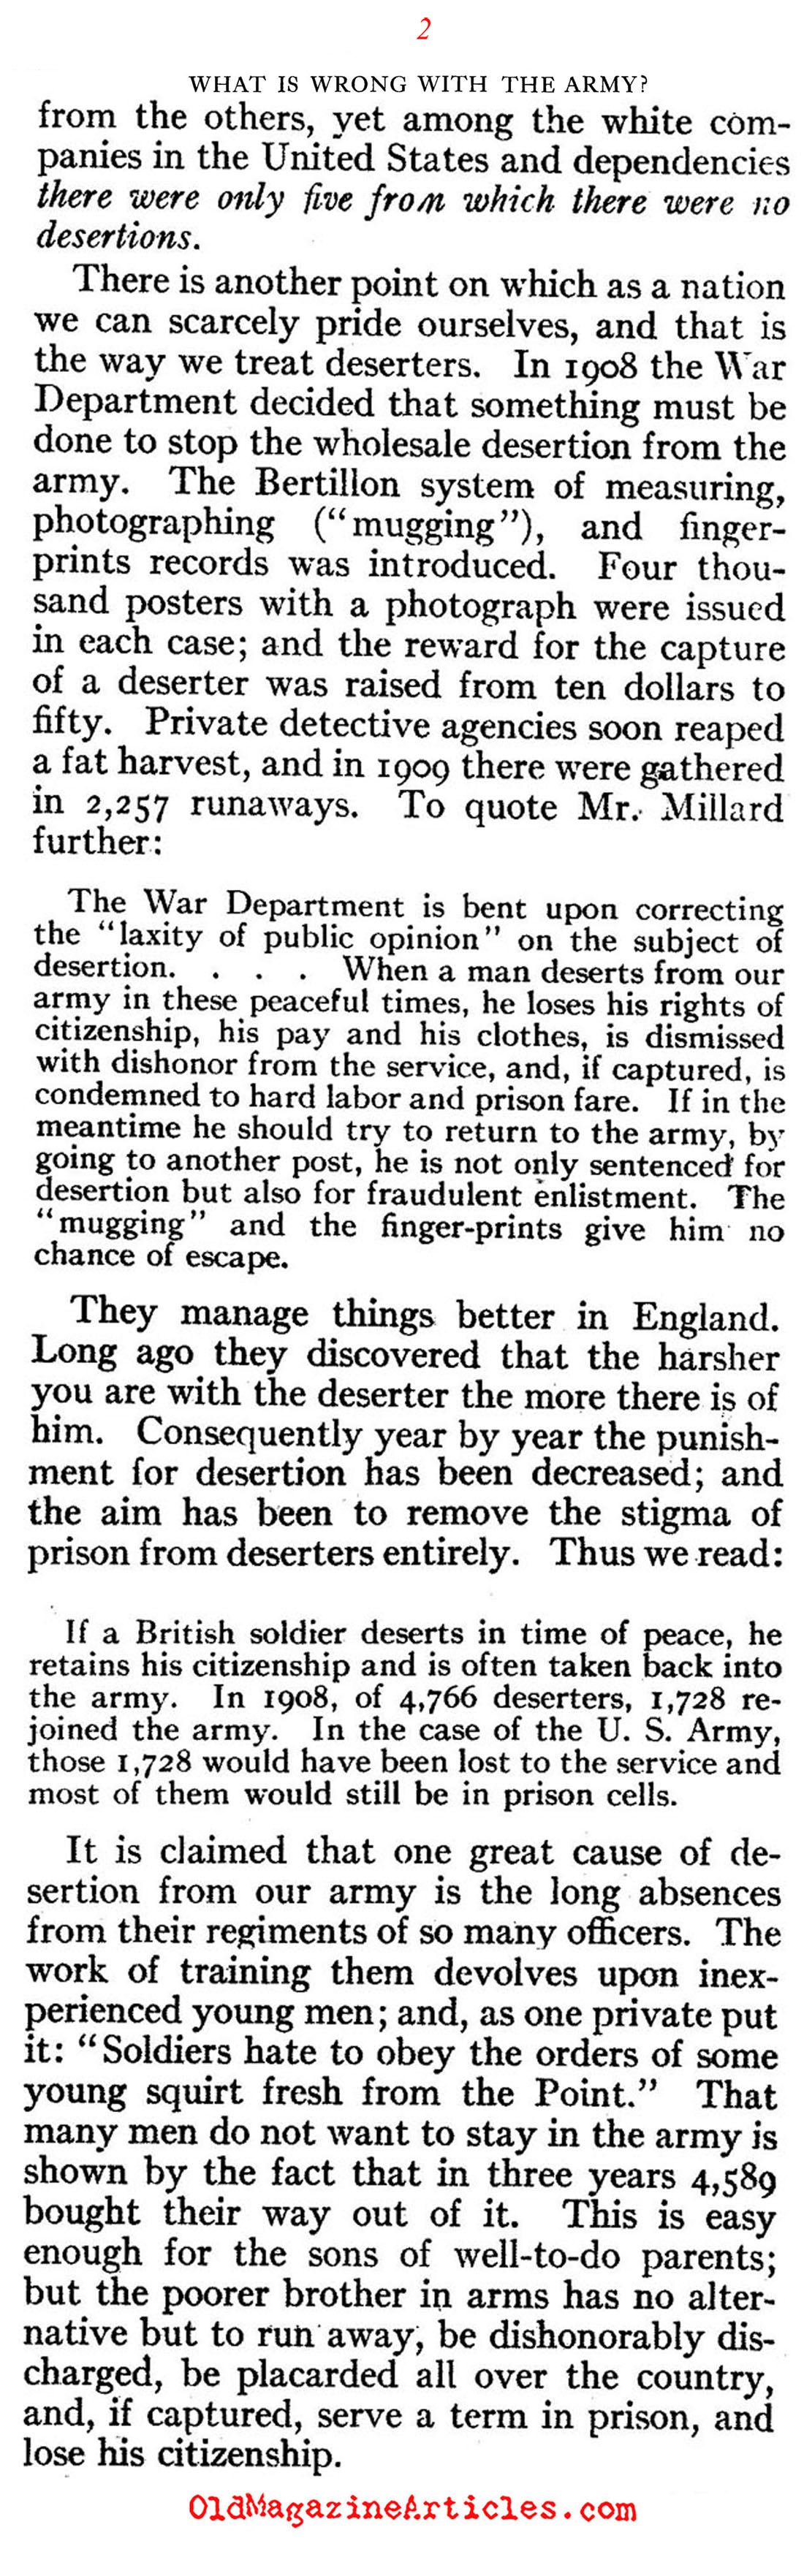 The U.S. Army: Plagued by Deserters   (Review of Reviews, 1910)